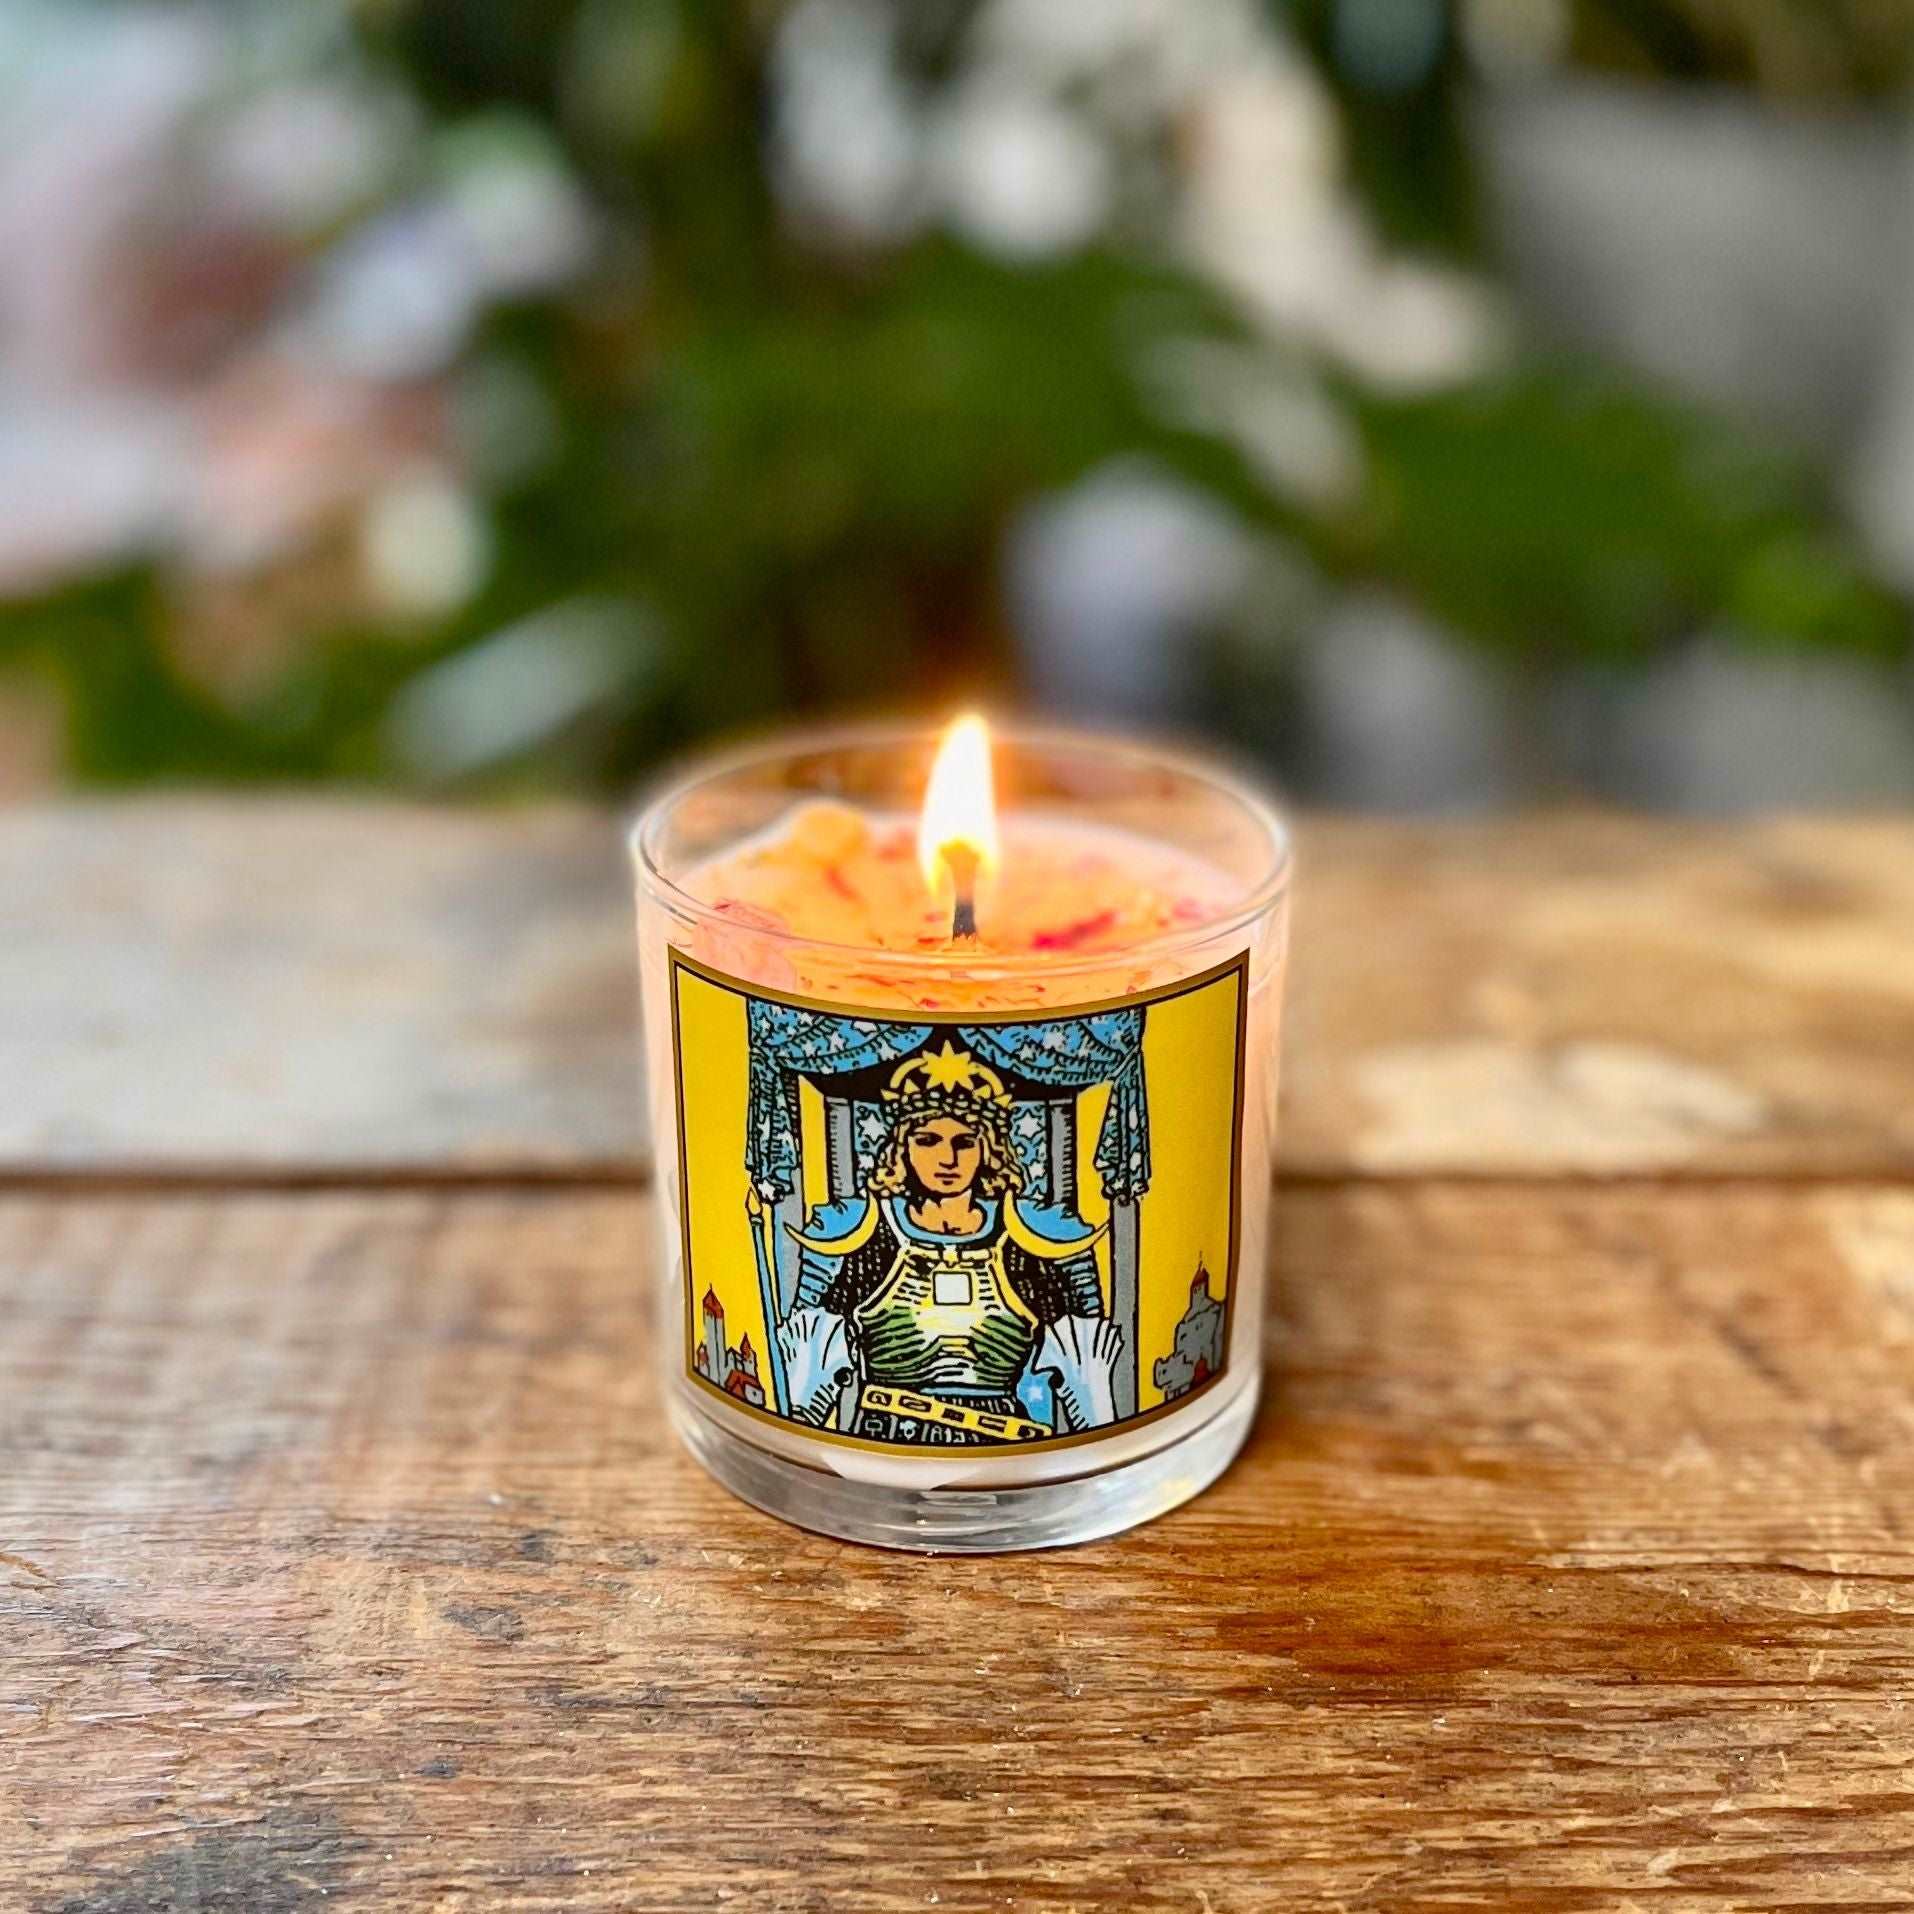 6 oz Natural GMM-Free Soy Wax The Chariot Tarot Candle for Determination, Victory, and Aromatherapy with Organic Sandalwood, Fir, and Frankincense Essential Oils and Amethyst Crystal